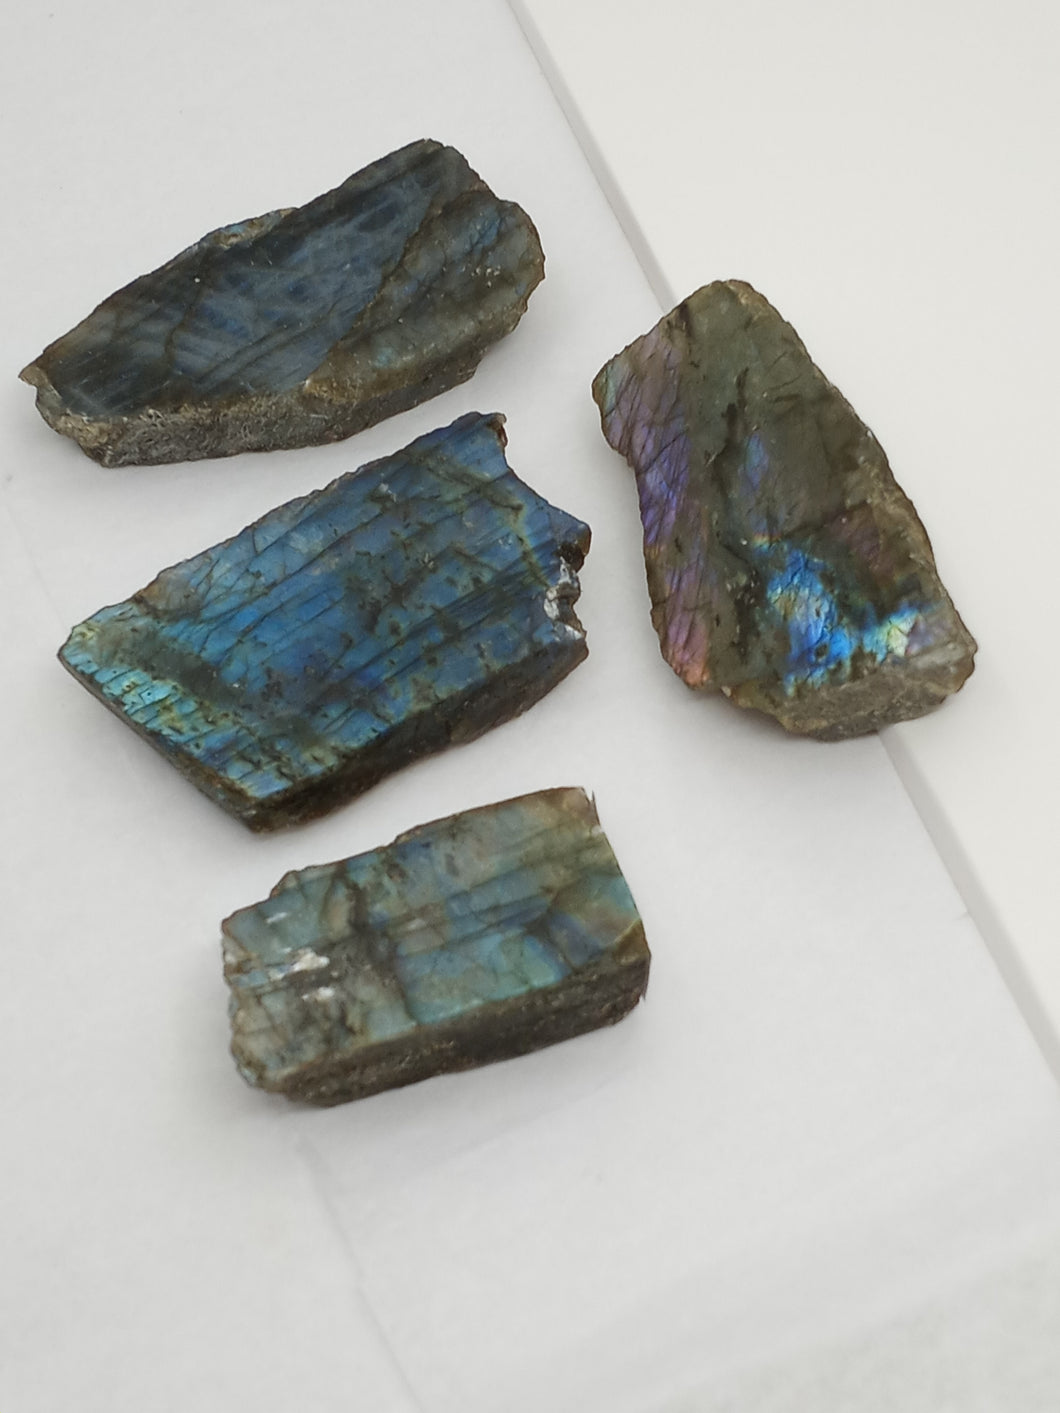 Labradorite polished face slab featuring four stones displaying iridescent colors on a smooth surface.